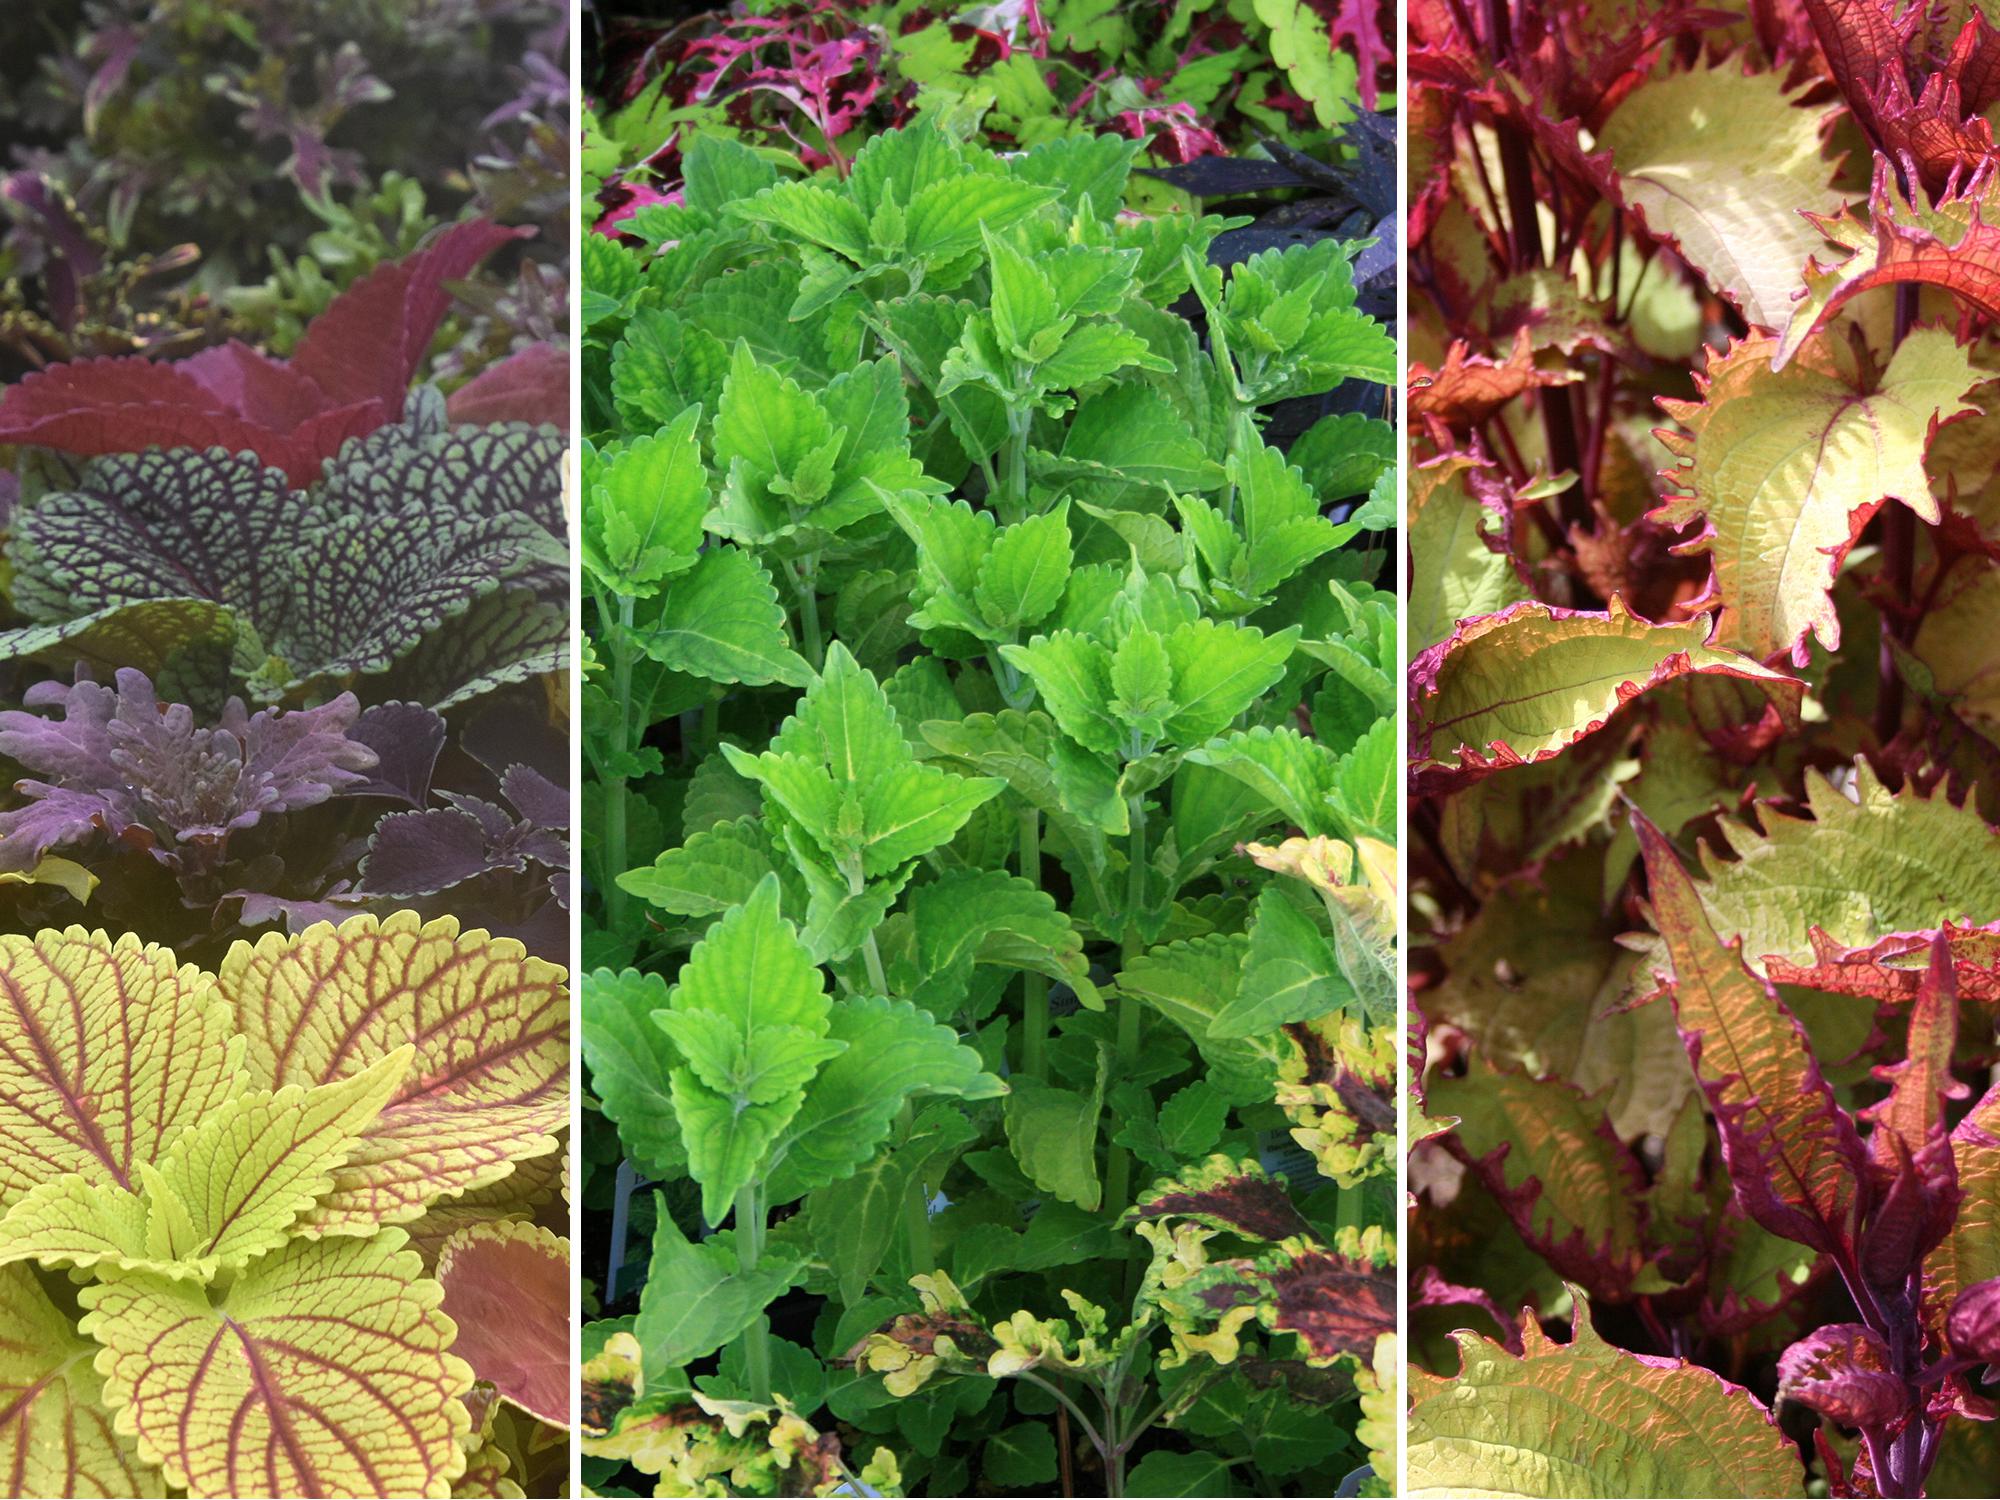 Sun coleuses (left) thrive in the Deep South but require constant moisture during summer months. —- A 2010 Mississippi Medallion winner, the Electric Lime coleus (middle) is durable and pairs well with spring and fall foliage. —- Henna coleus (right) has chartreuse and copper colors on the tops of its leaves and shades of burgundy underneath. (Photos by Gary Bachman/MSU Extension)